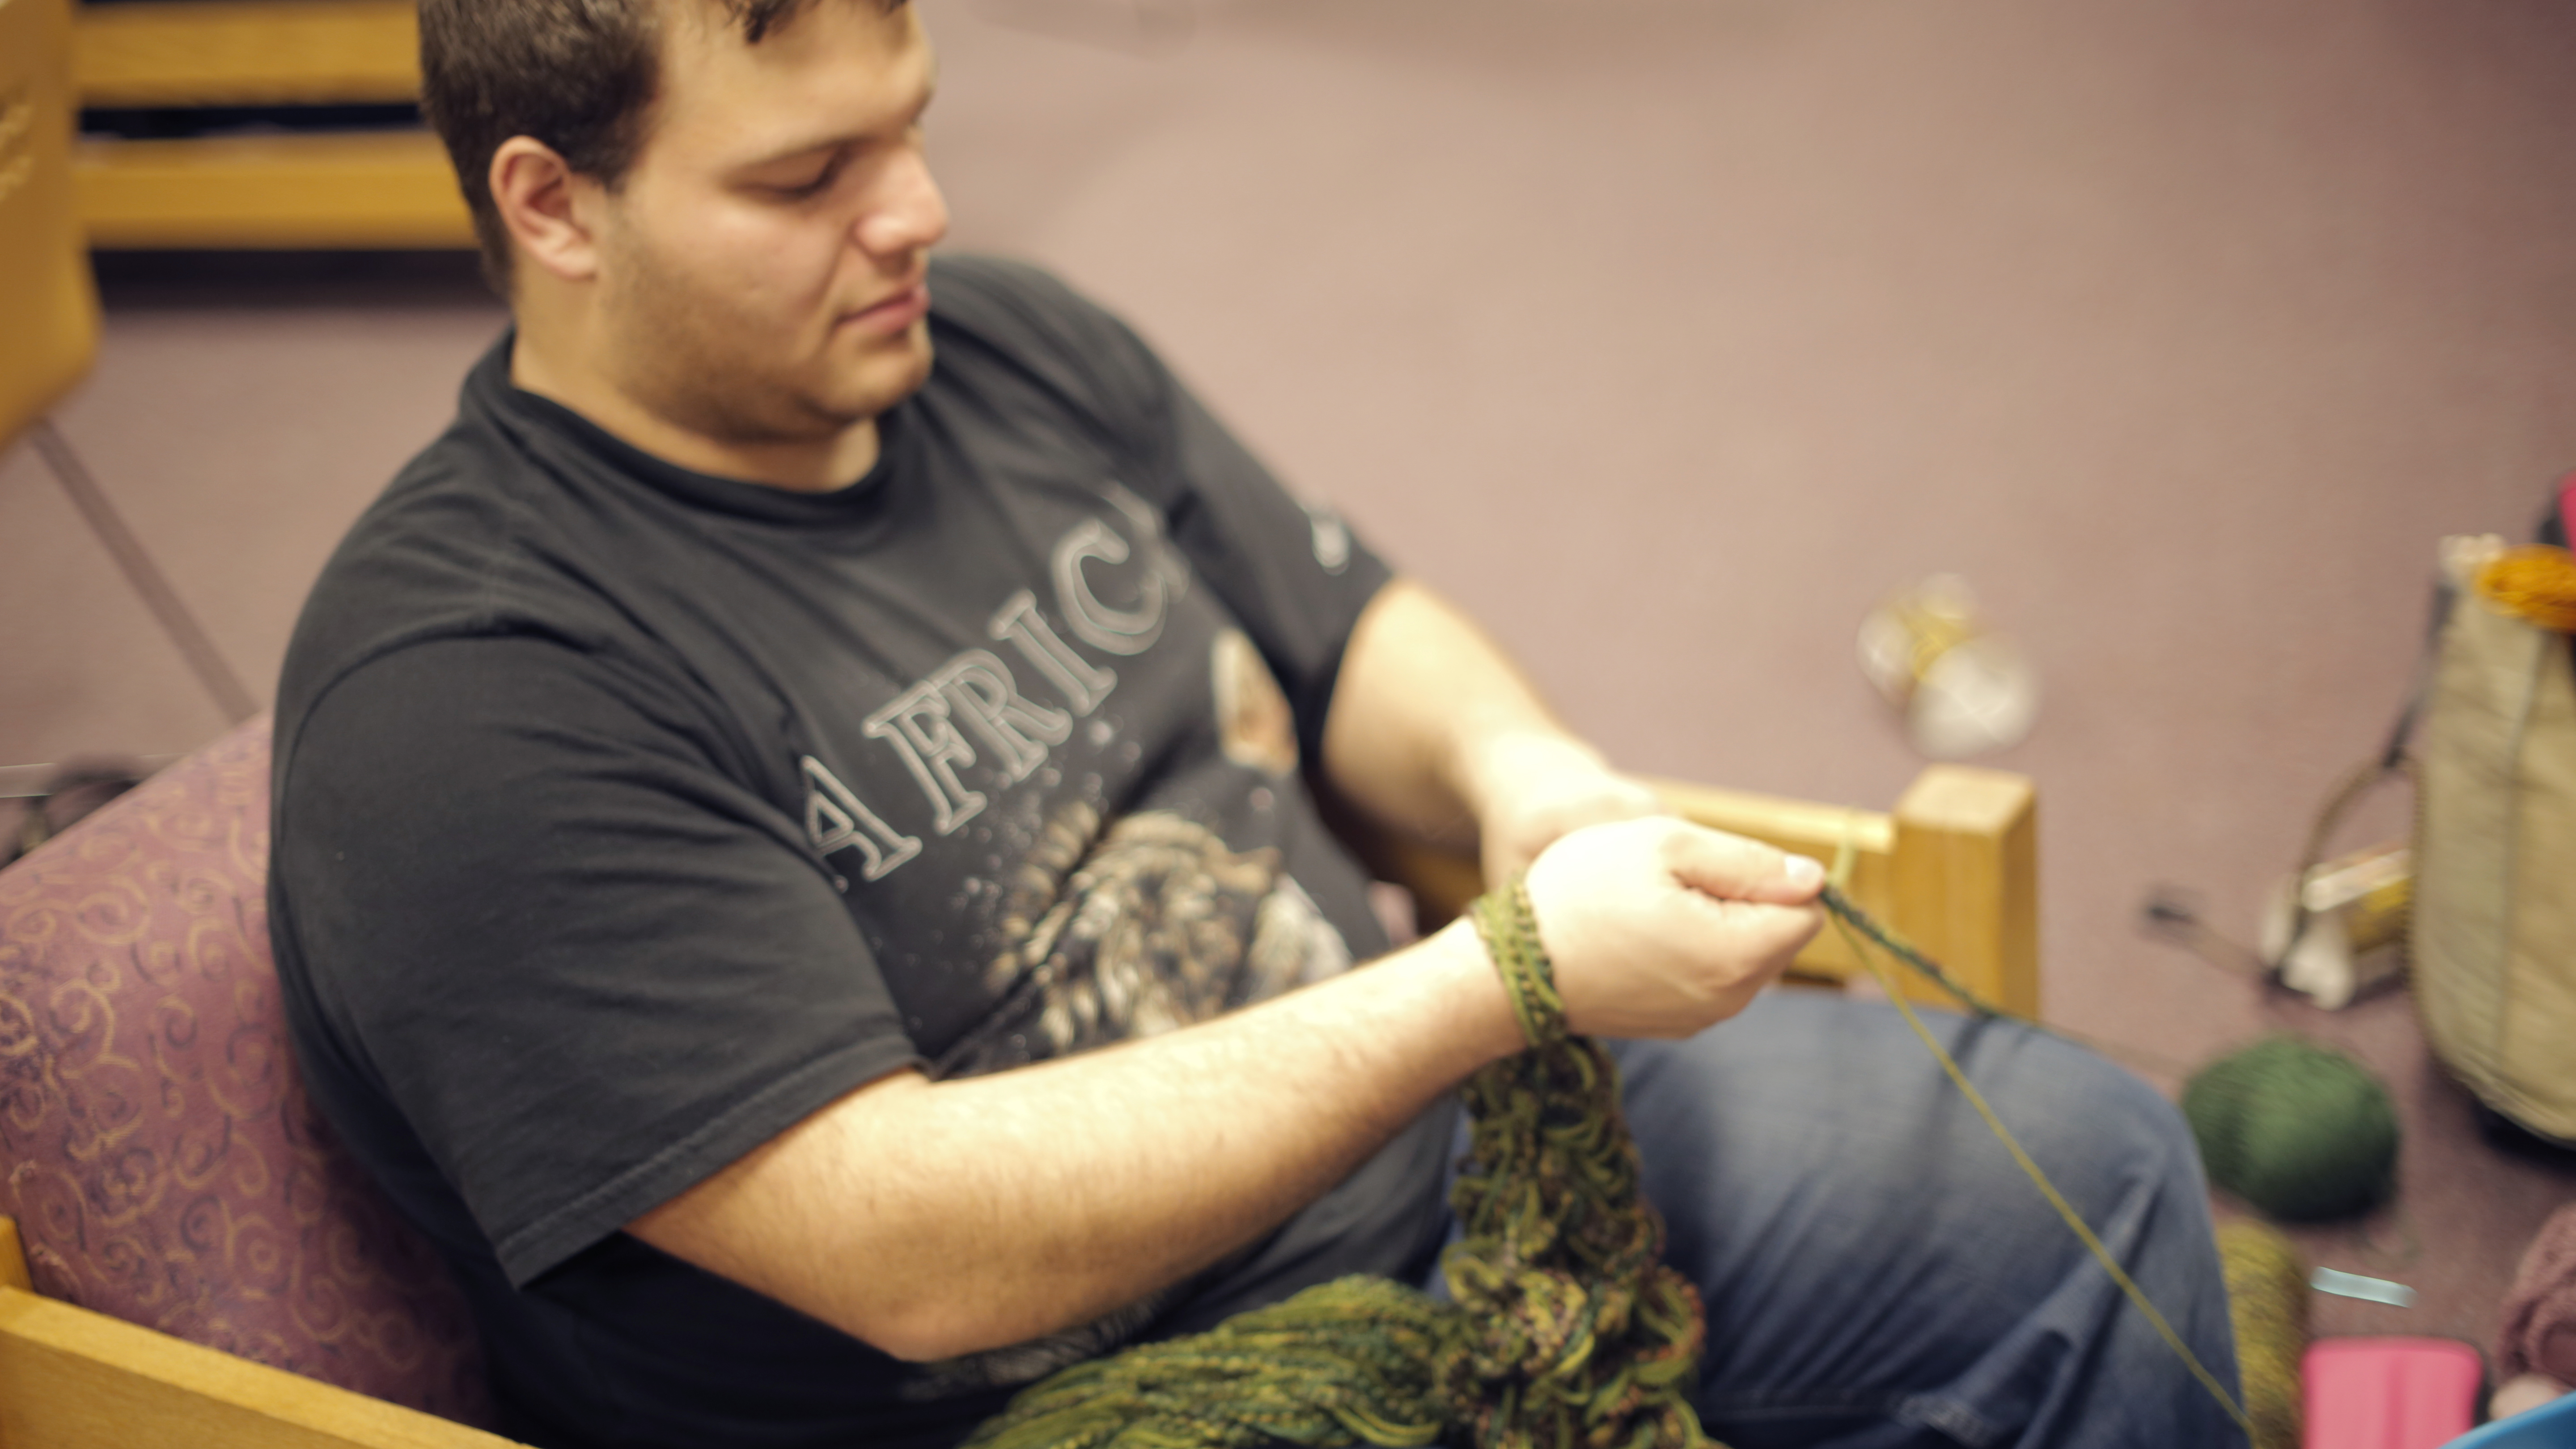 A Knitting Club member knitting with his arm